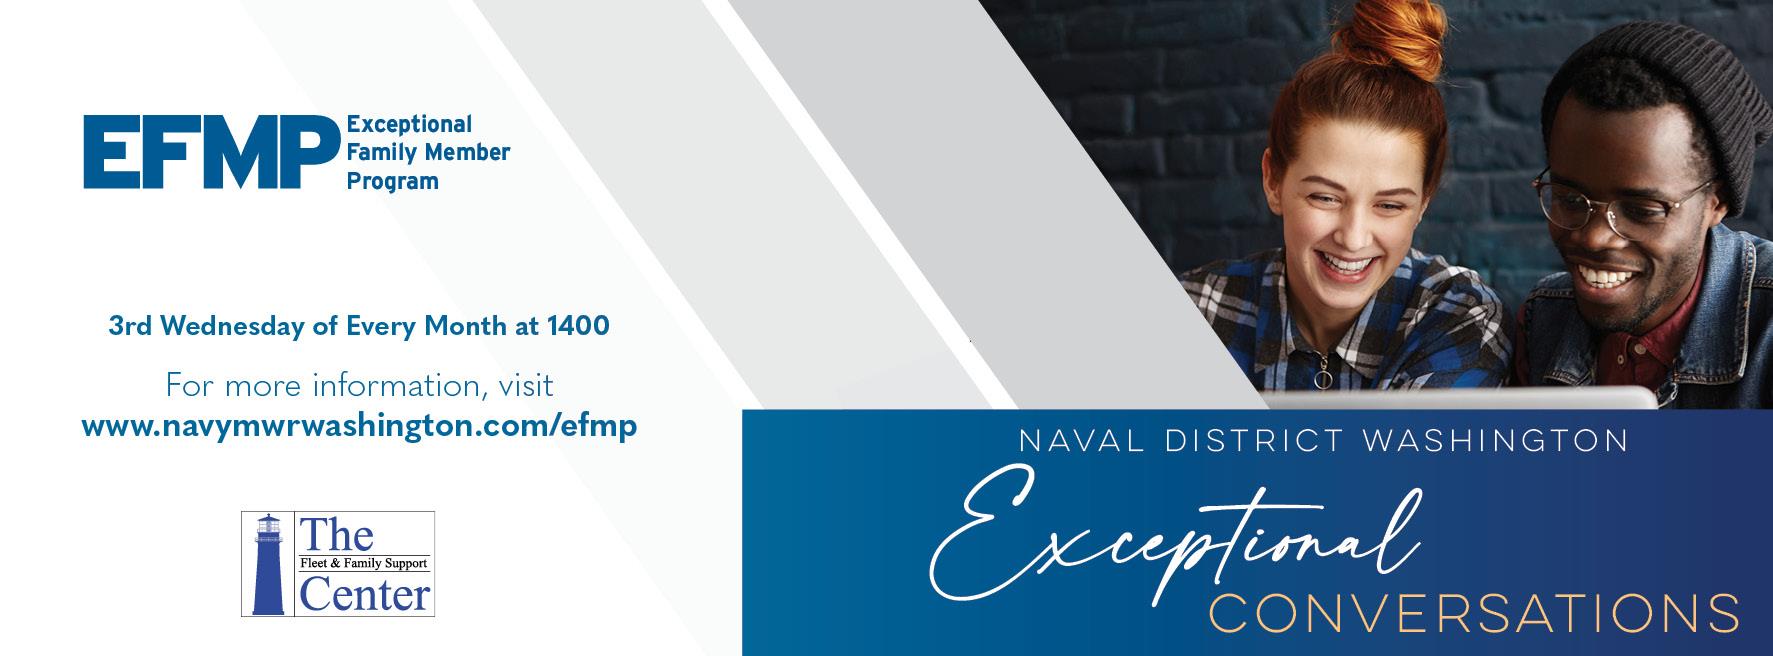 Exceptional Family Member Program Nsaw